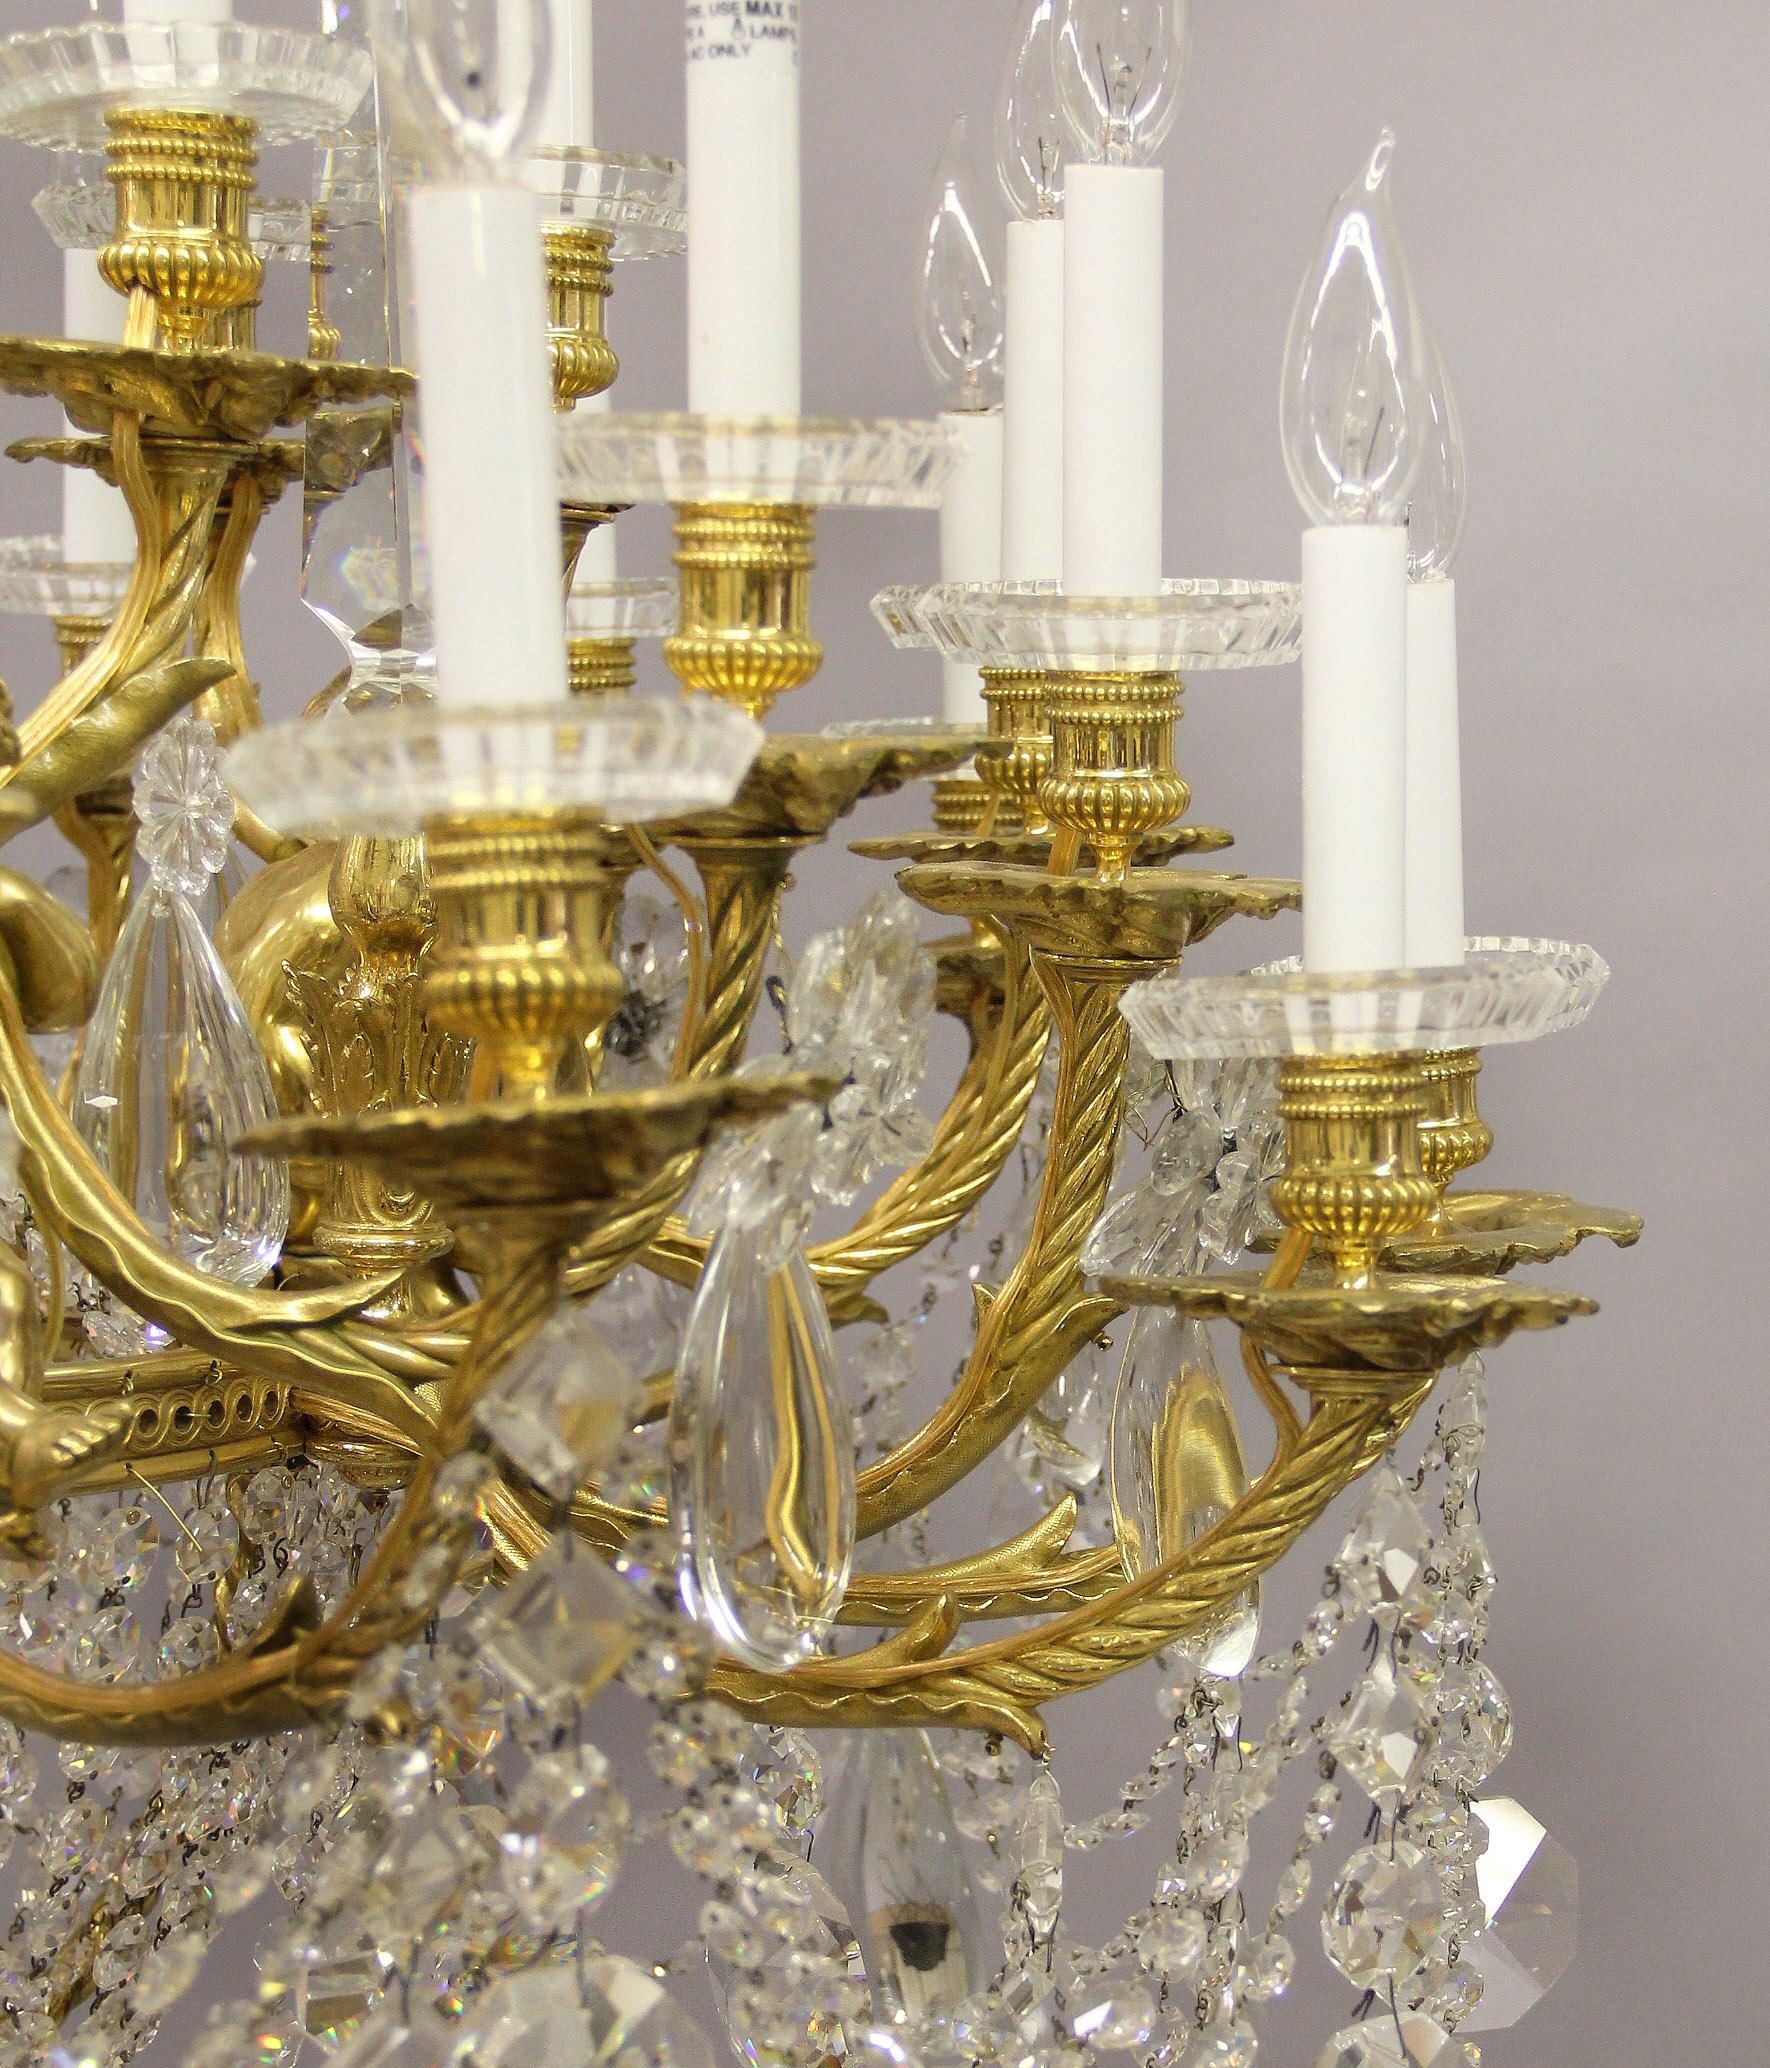 Exquisite Late 19th Century Gilt Bronze and Crystal Chandelier by Baccarat For Sale 2